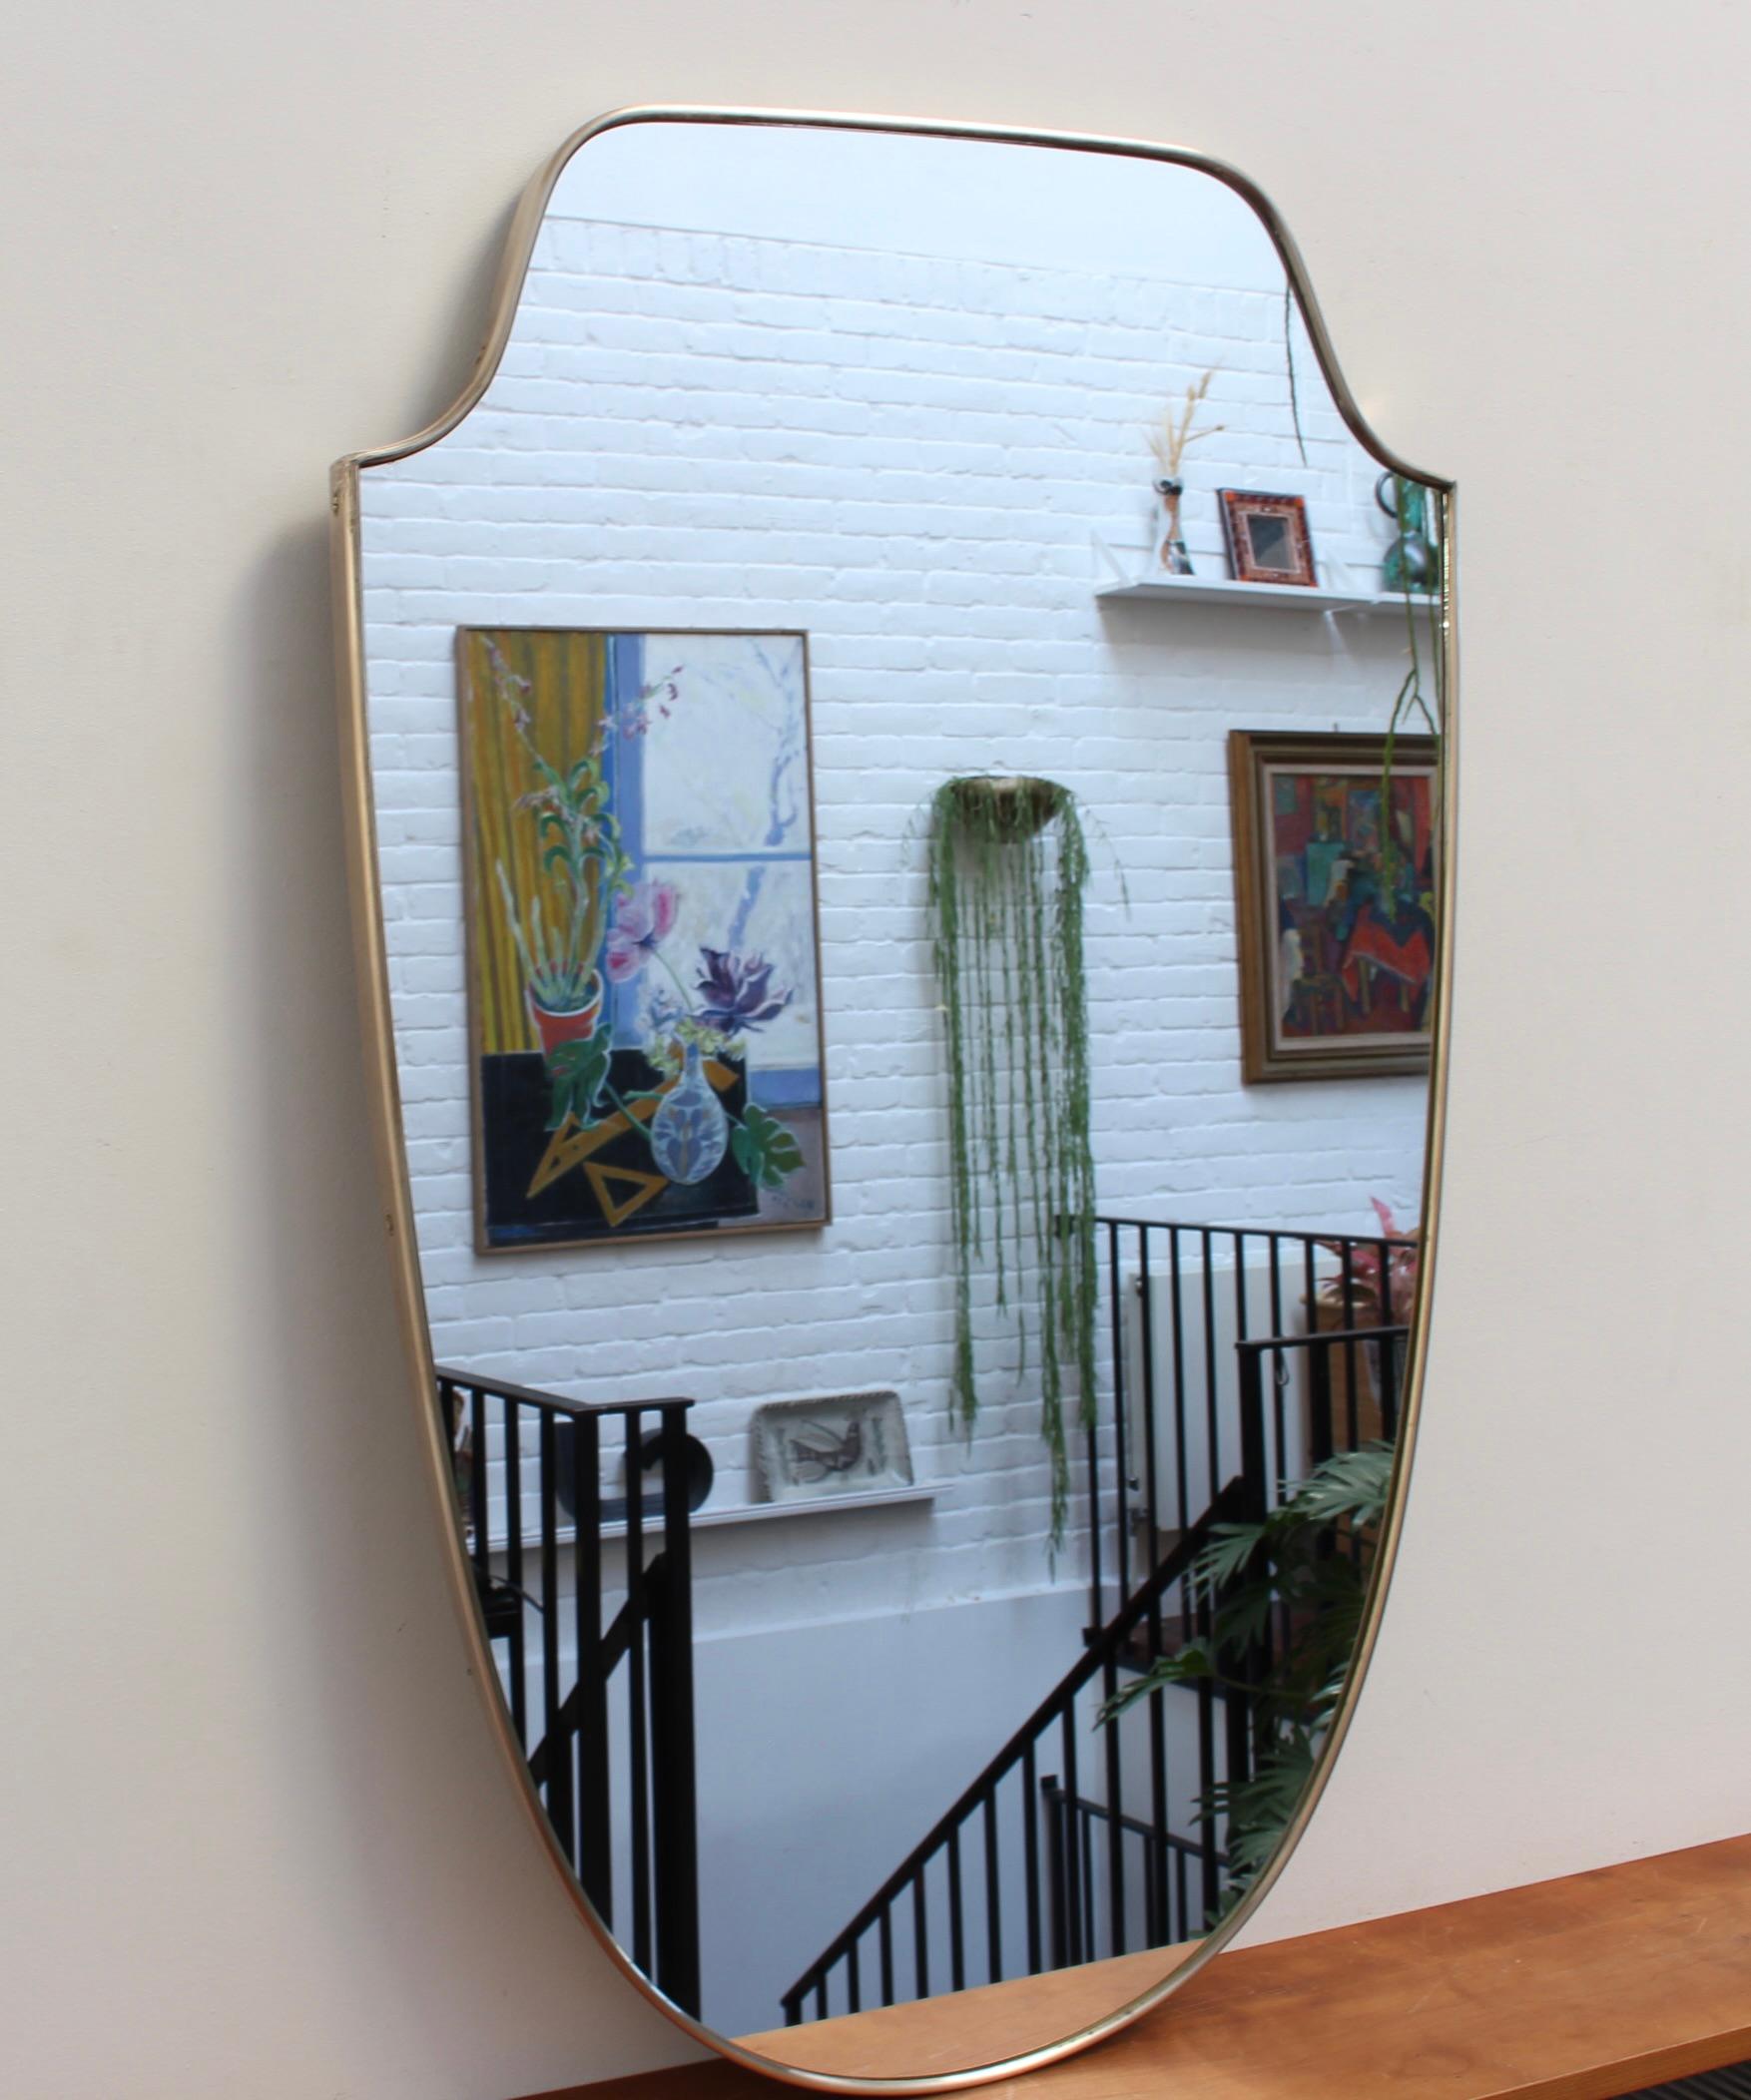 Mid-century Italian wall mirror with brass frame (circa 1950s). This is one of a pair of mirrors which are beautifully-shaped and distinctive in a Modern style. It is in good overall condition with the exception of a few small blemishes in the